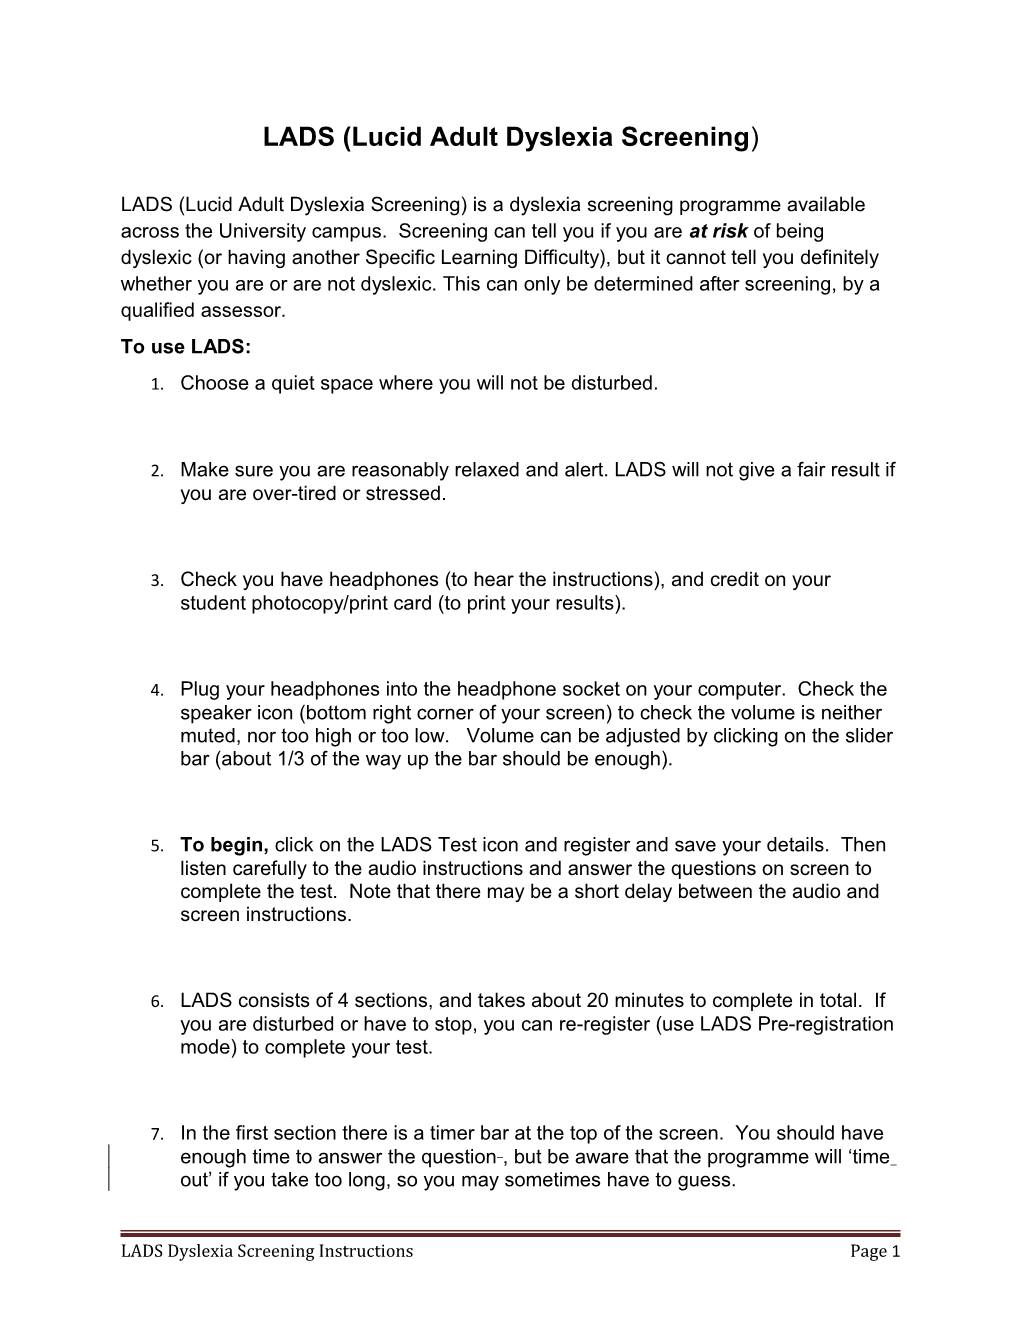 LADS Network Version Draft Instructions